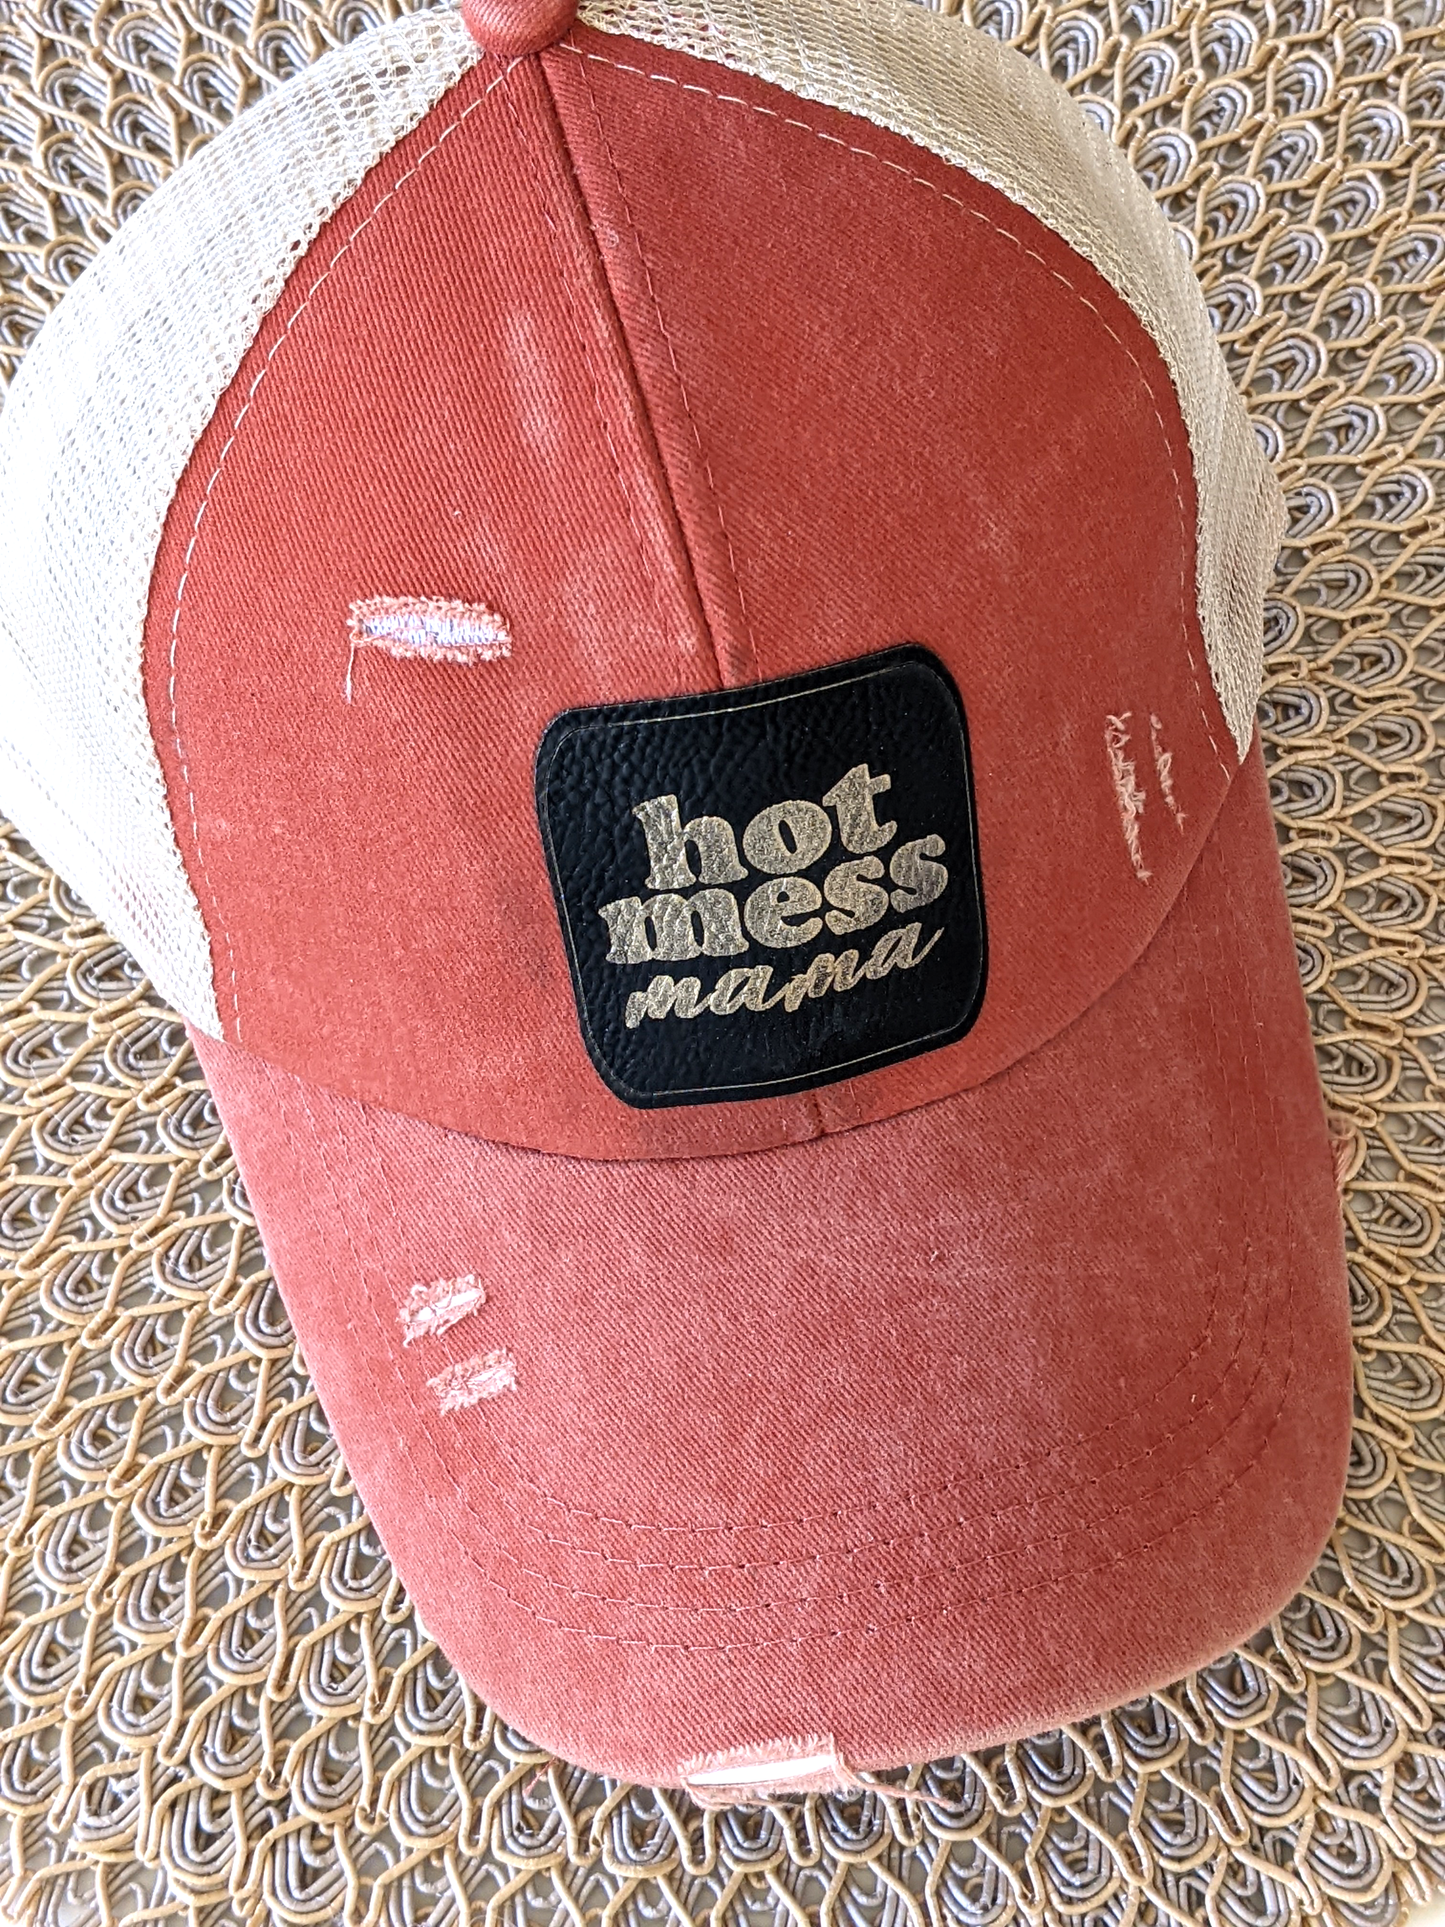 Hot Mess Mama Leather Patch Criss Cross Hat